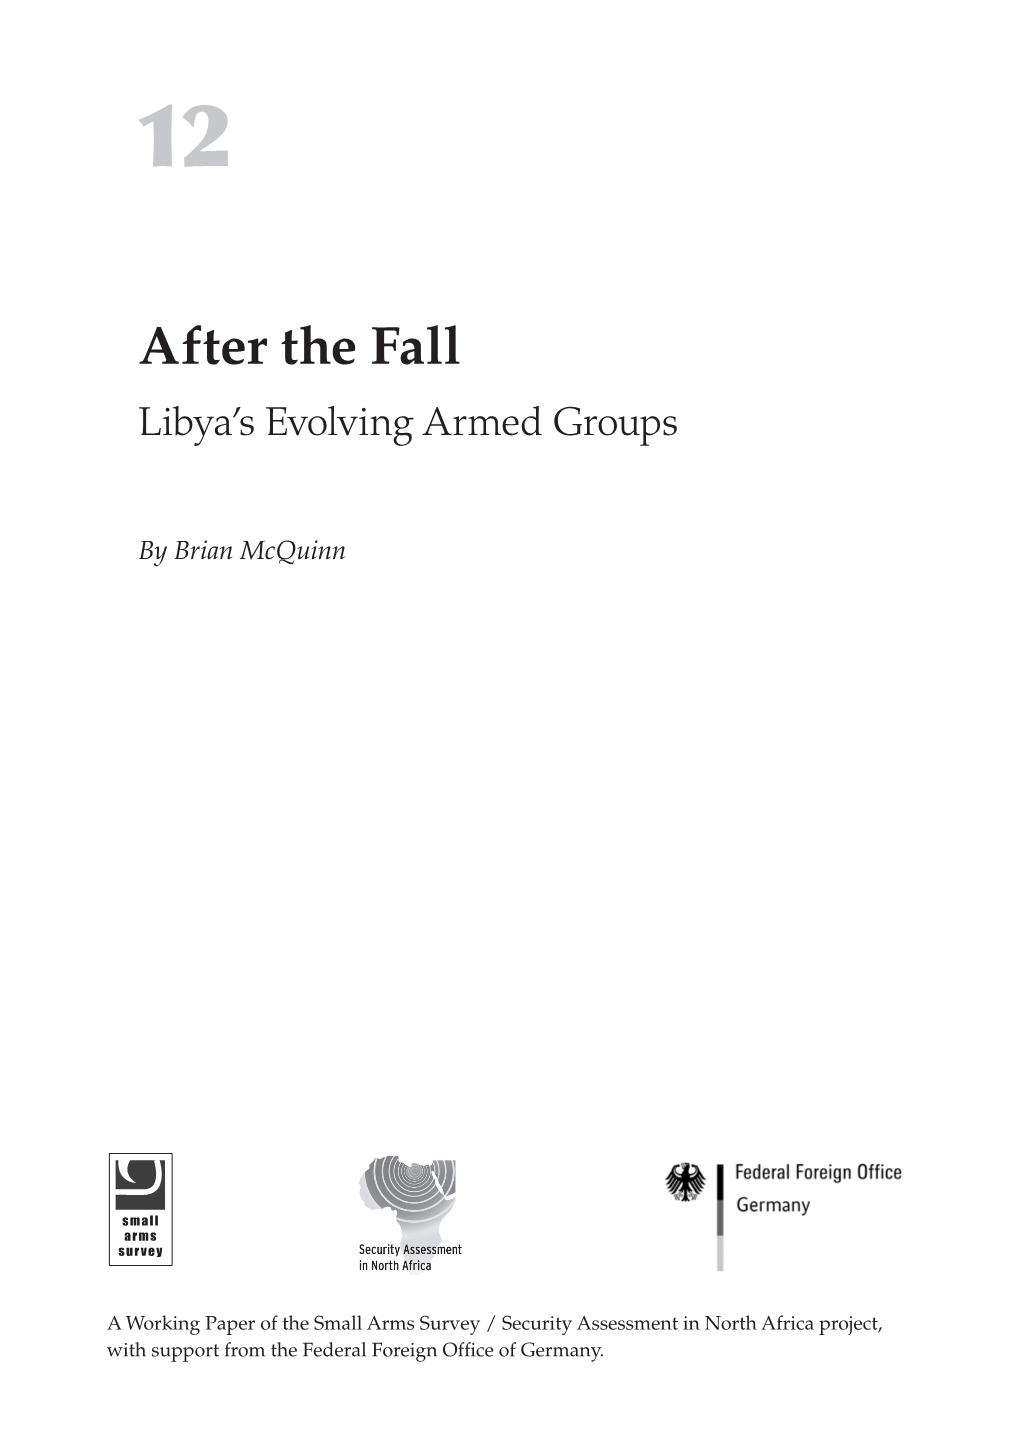 After the Fall: Libya's